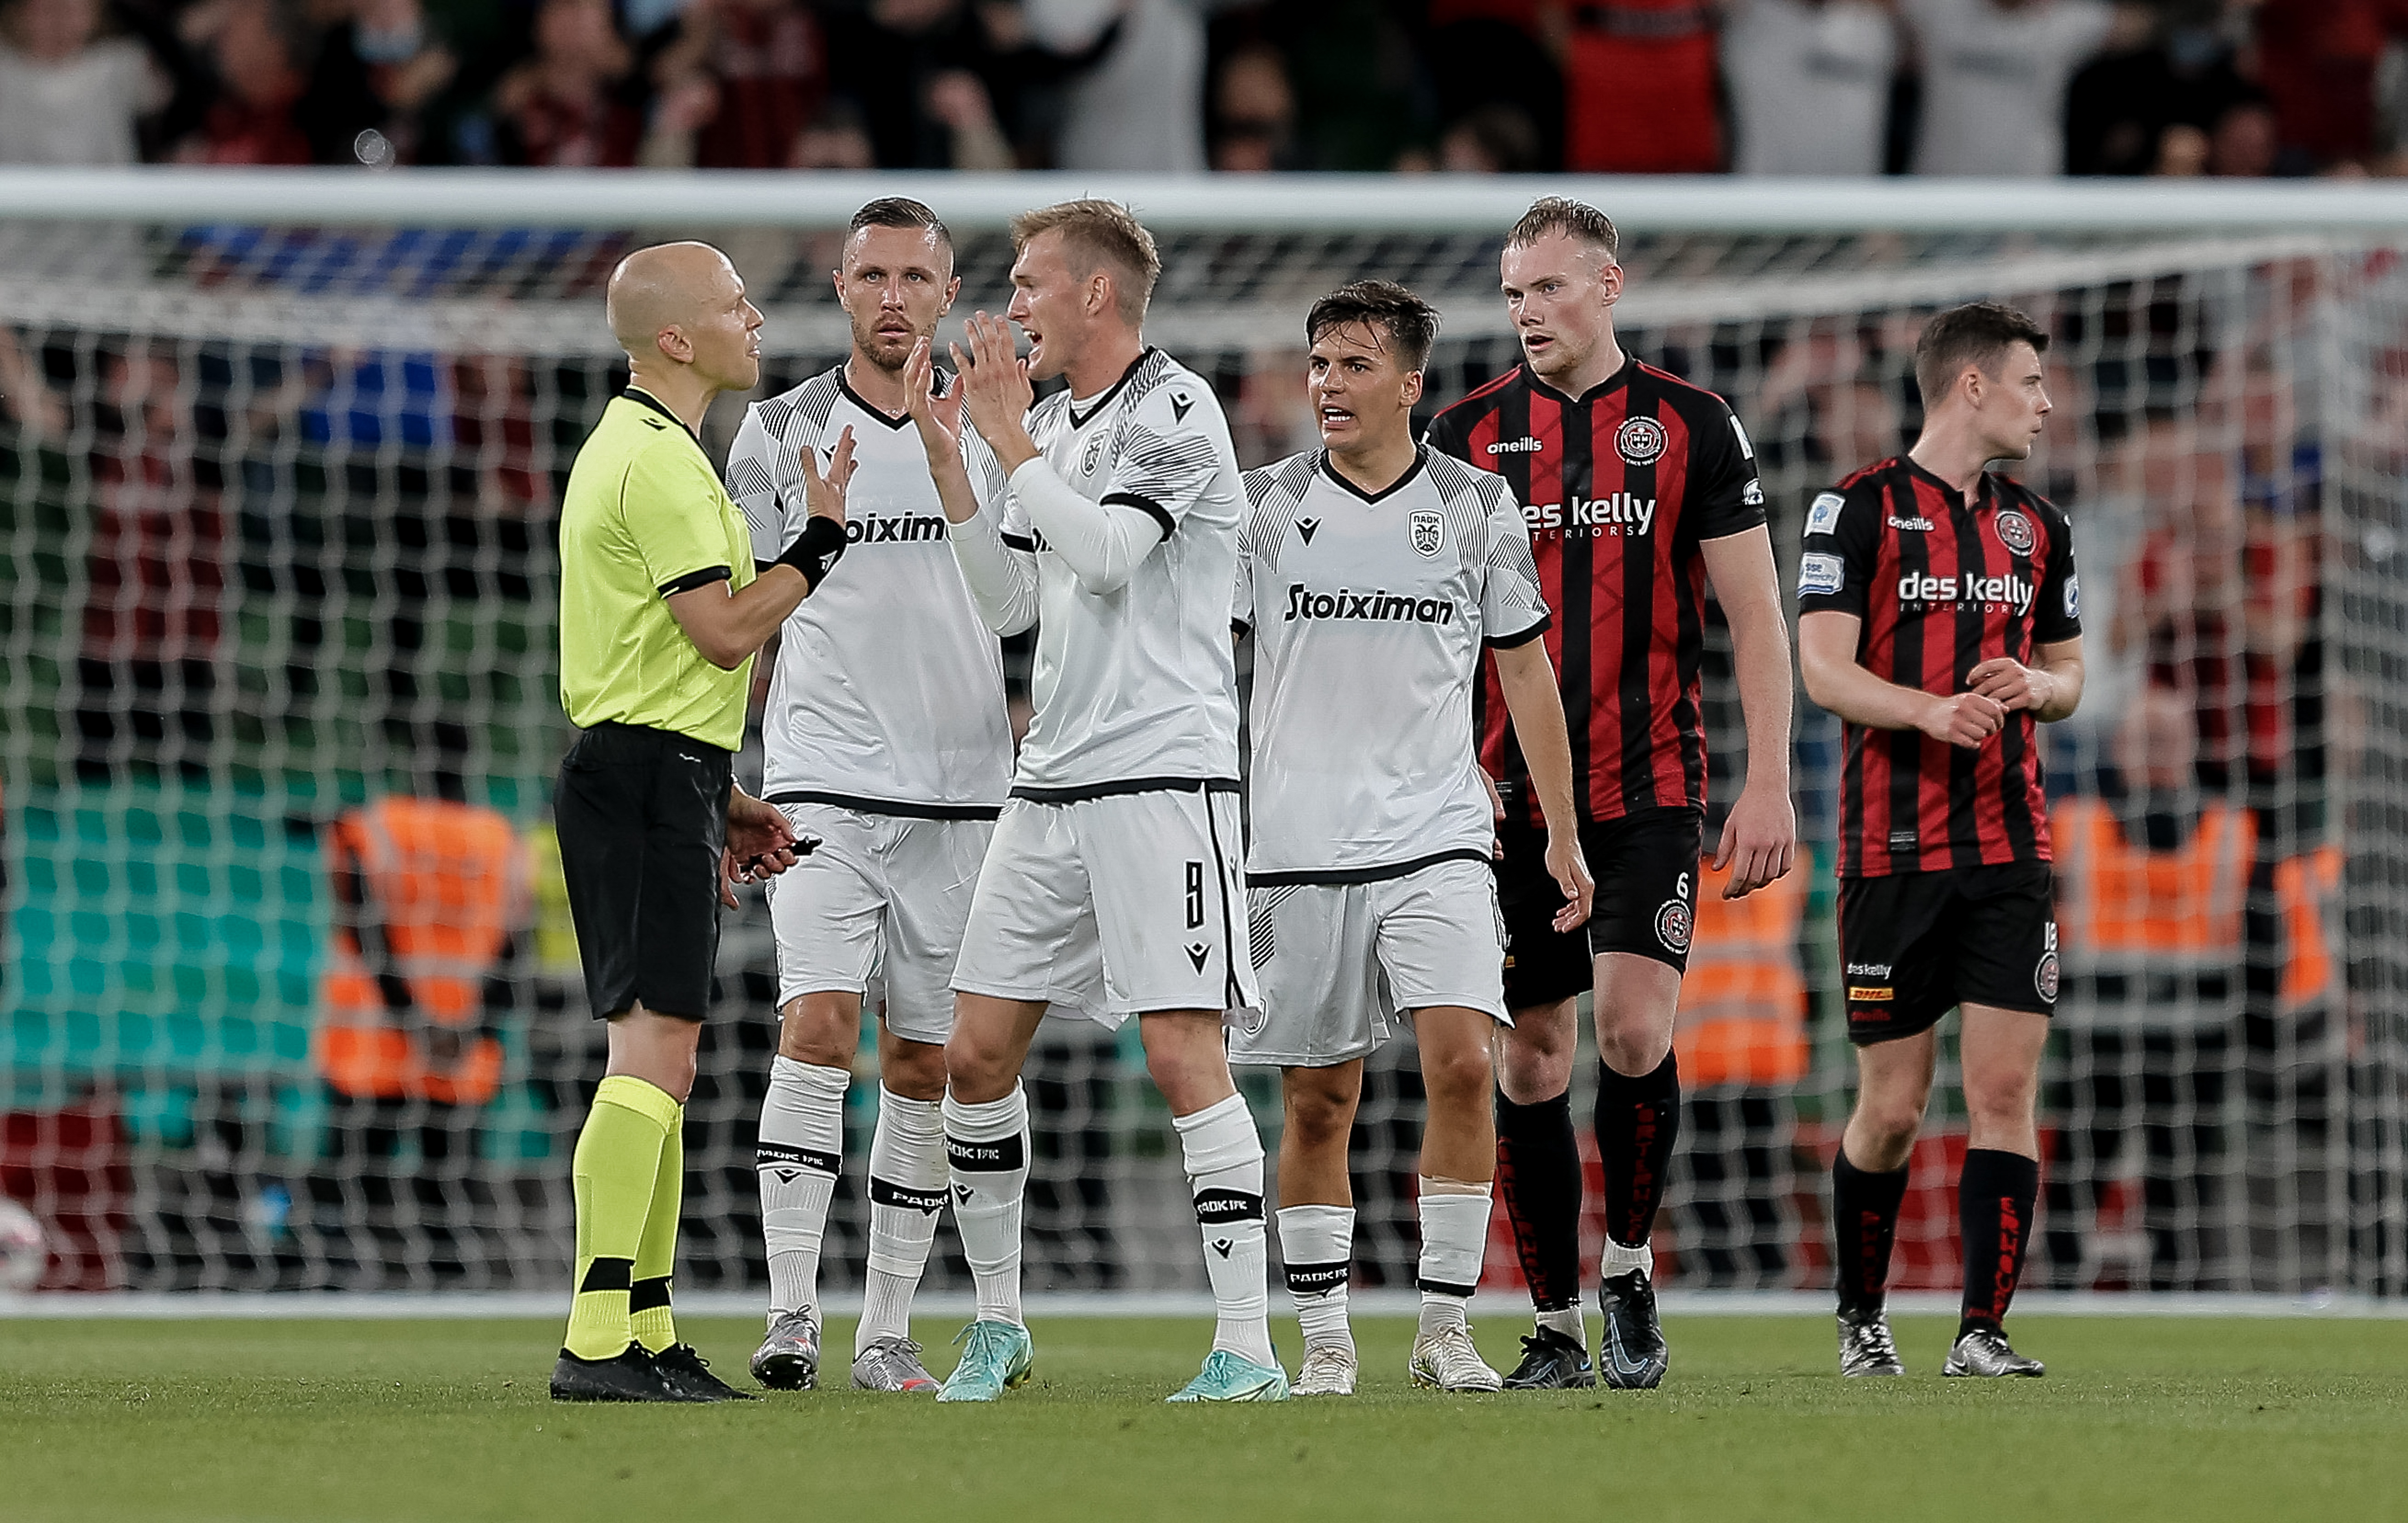 3rd August 2021; Aviva Stadium, Dublin, Leinster, Ireland; Europa Conference League Qualifier, Bohemians Football Club versus PAOK; Karol Świderski of PAOK FC protests to Referee Antti Munukka about a decision against POAK